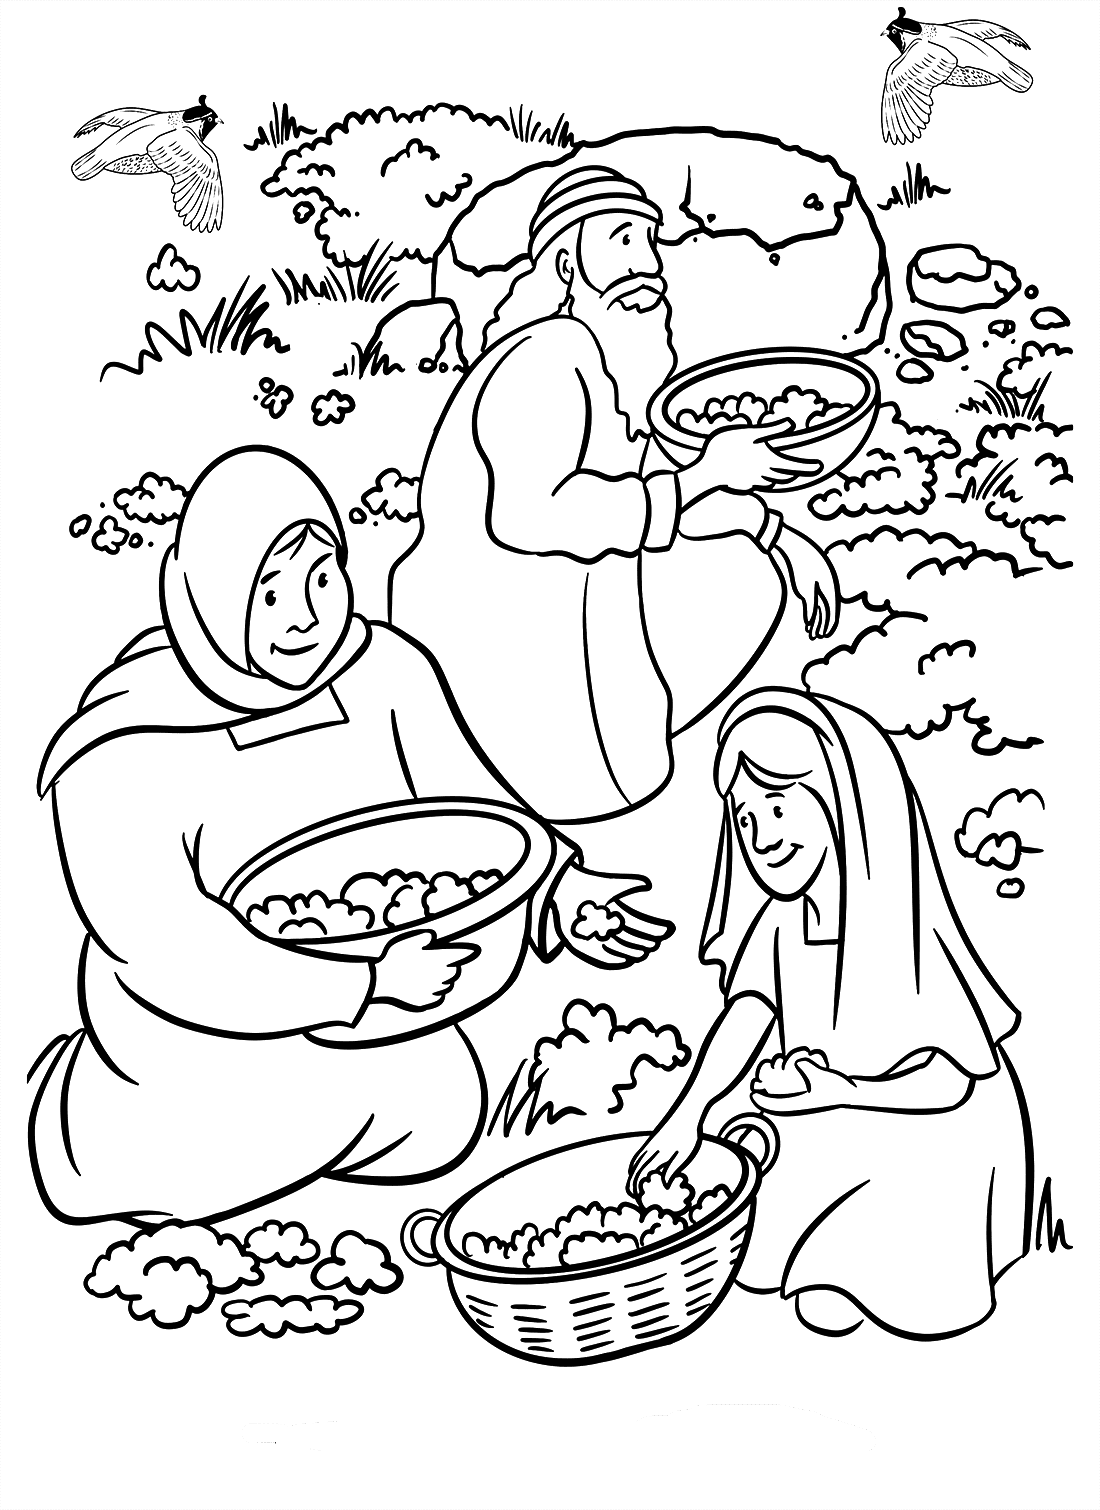 manna and quail coloring page